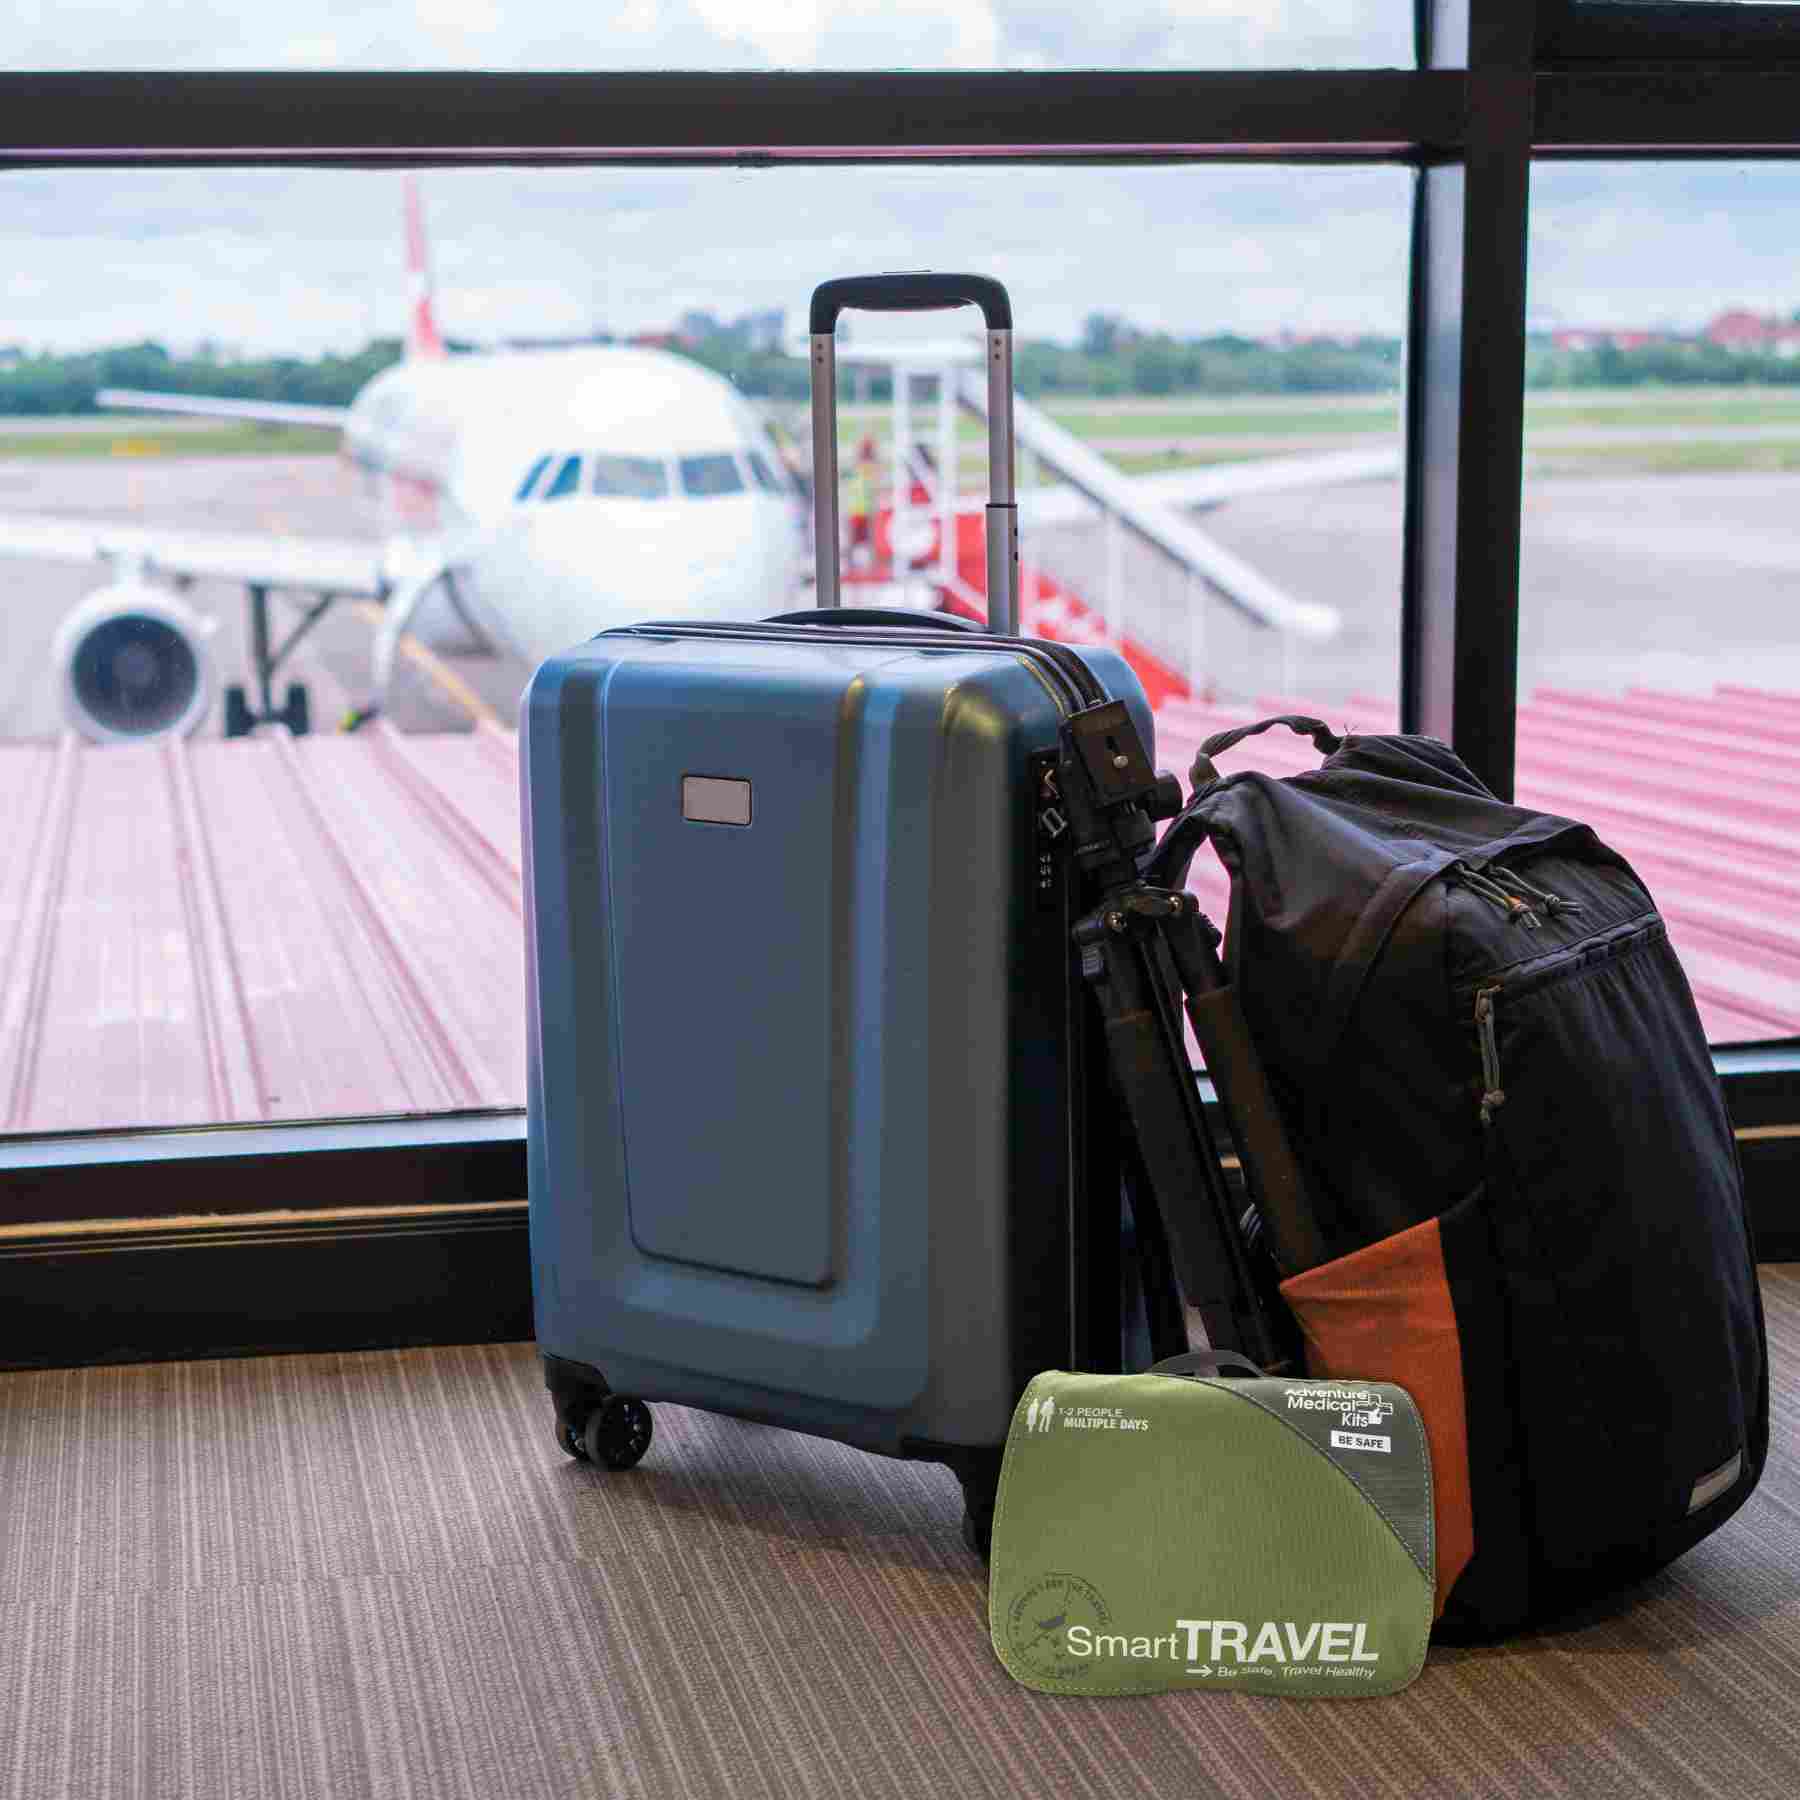 Travel Series Medical Kit - Smart Travel in front of luggage